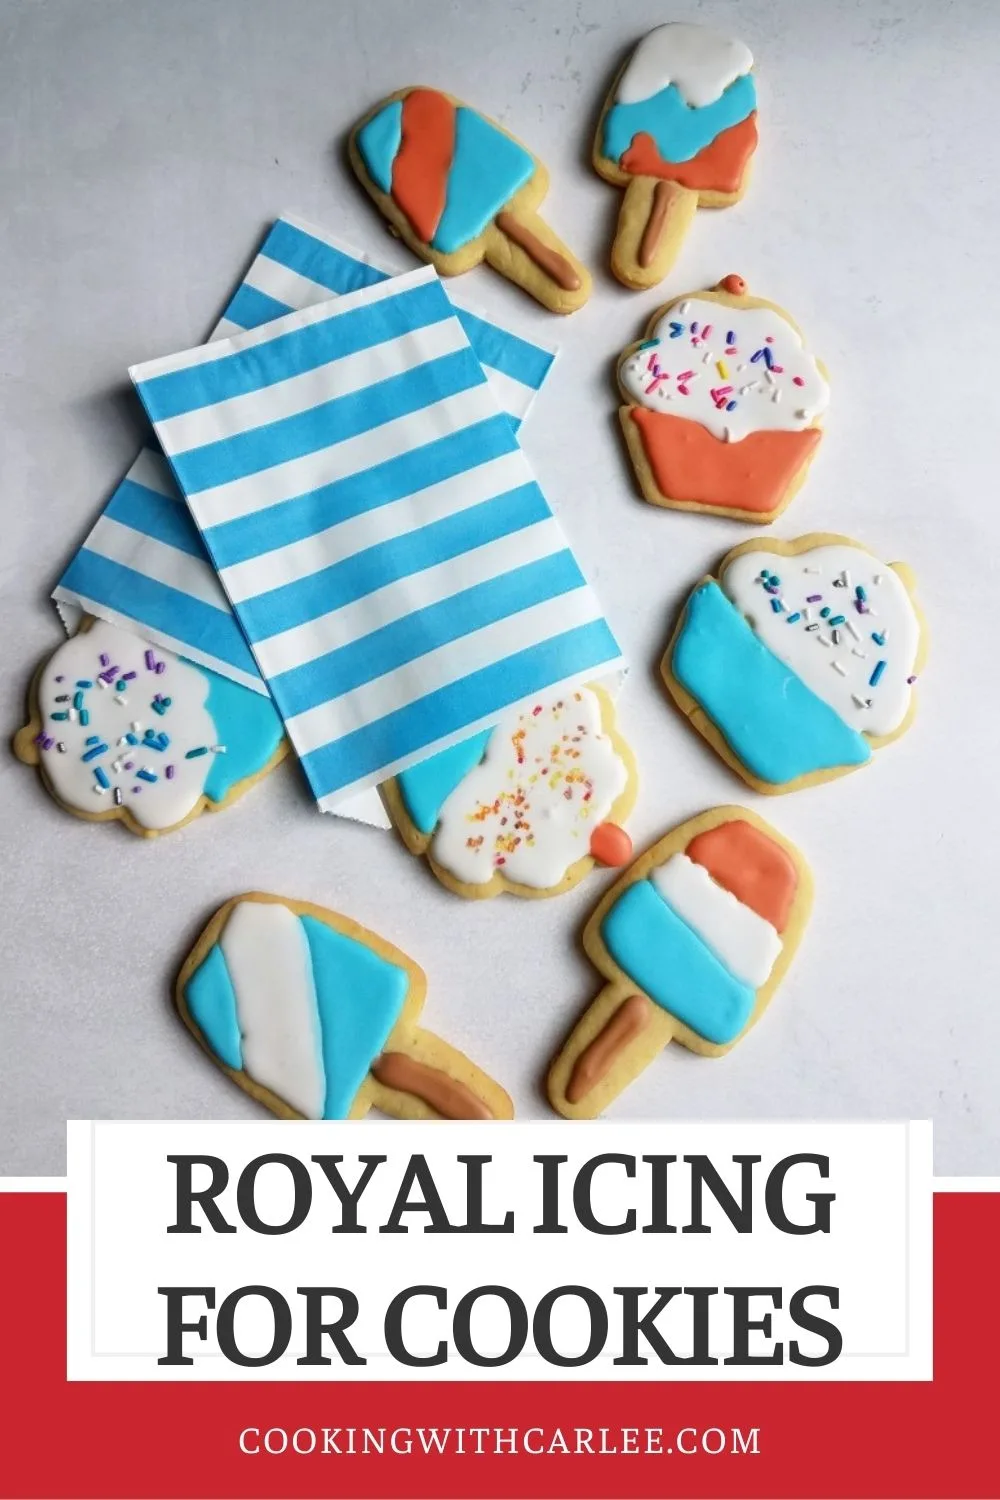 Royal icing is great for making all sorts of different designs on cookies. The recipe for the icing itself is really simple. Using it can be intimidating though, so let me show you a quick and easy way to decorate cookies with royal icing. This method lets you be creative without too much fuss and very little equipment.  Your cookies can be the hit of the holidays!